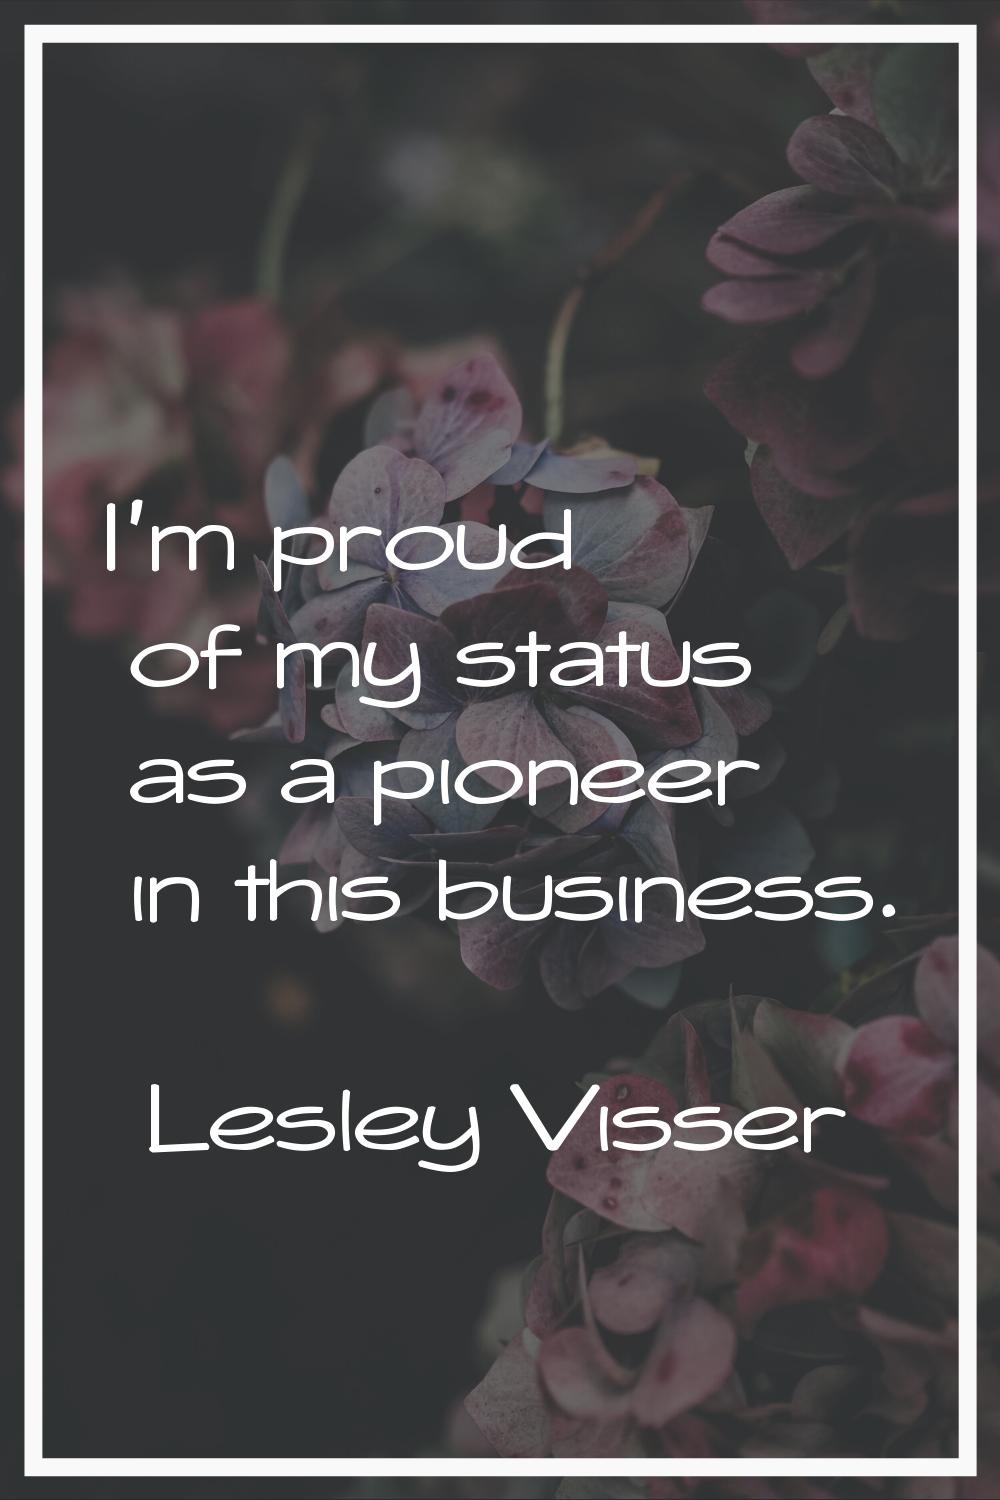 I'm proud of my status as a pioneer in this business.